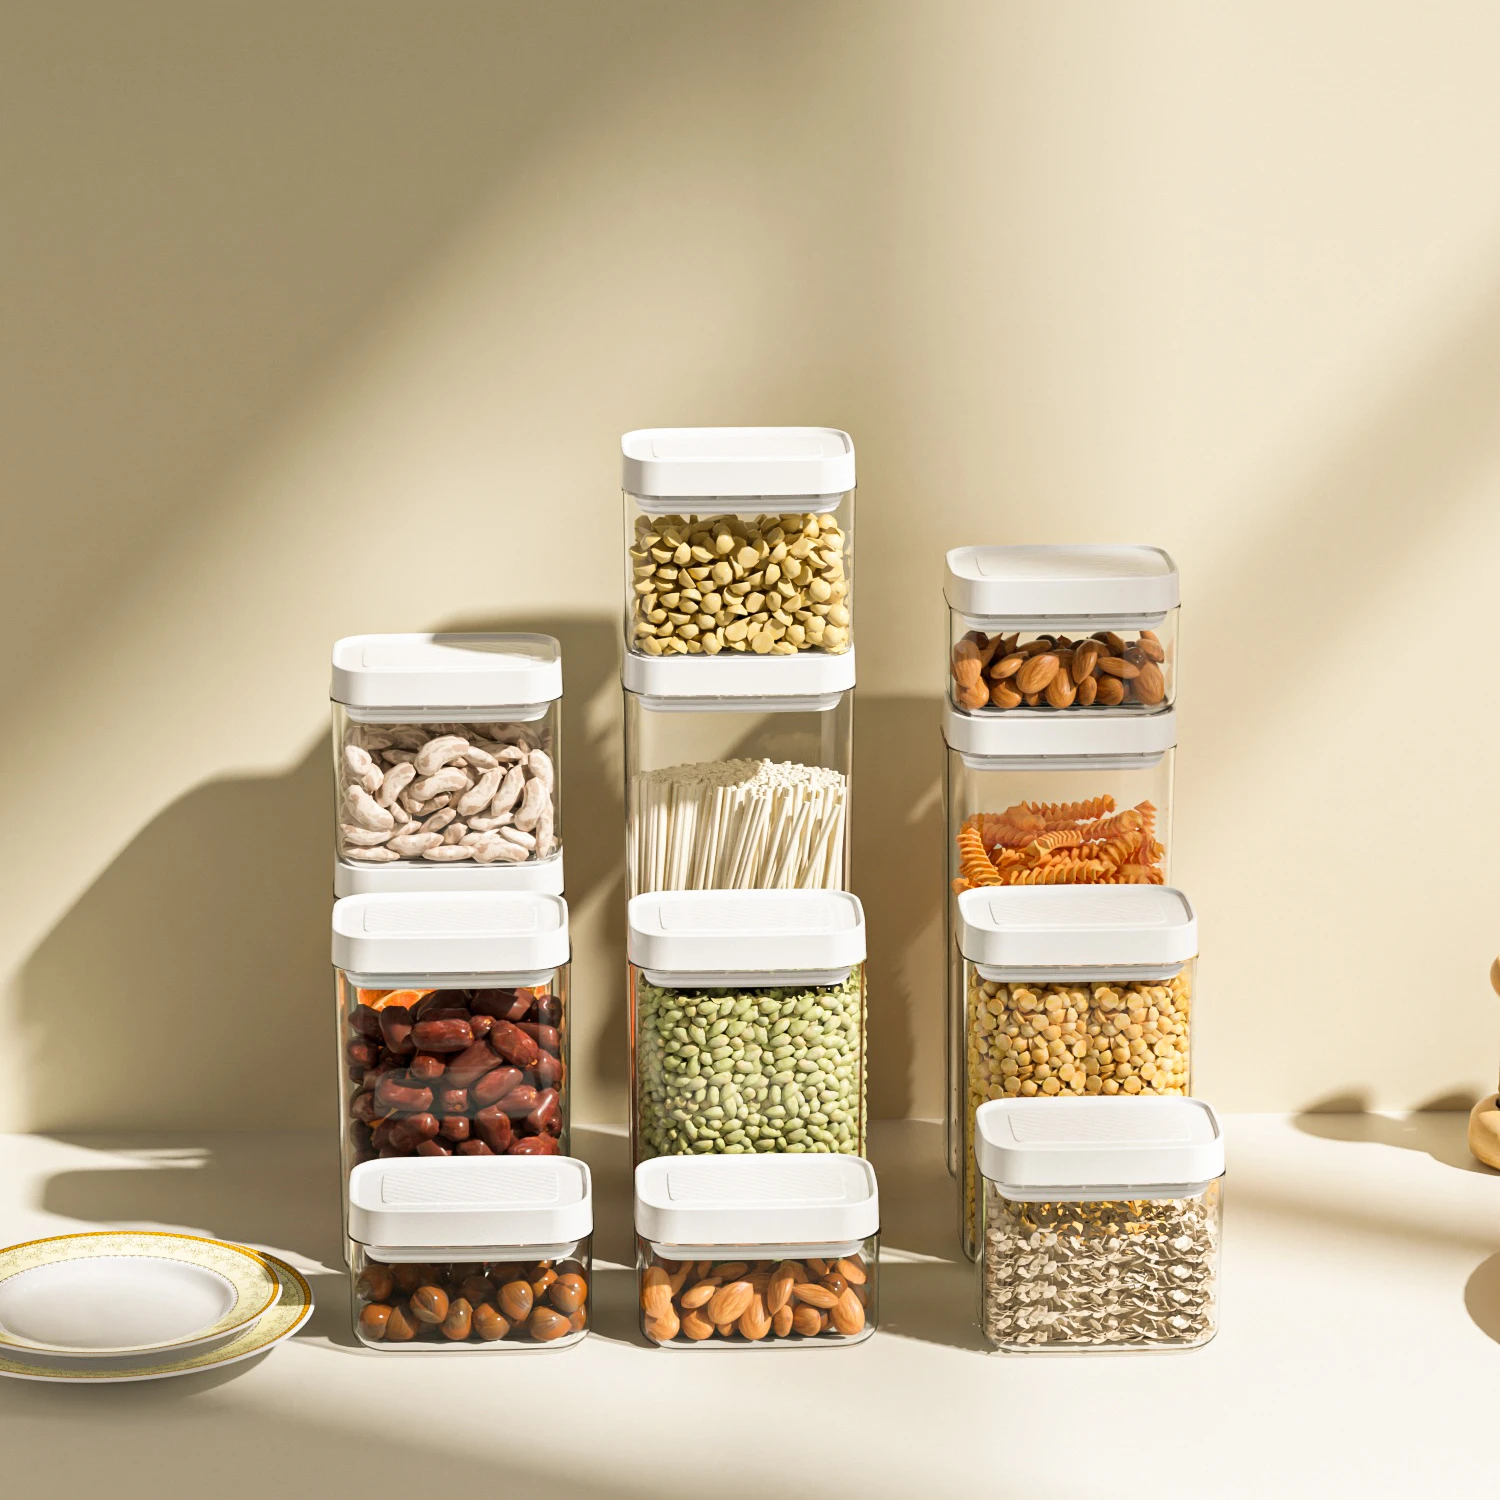 

Kitchen Storage Containers BPA Free Keep Food Fresh Plastic Food Spice Jars Canister Sets With Airtight Lid